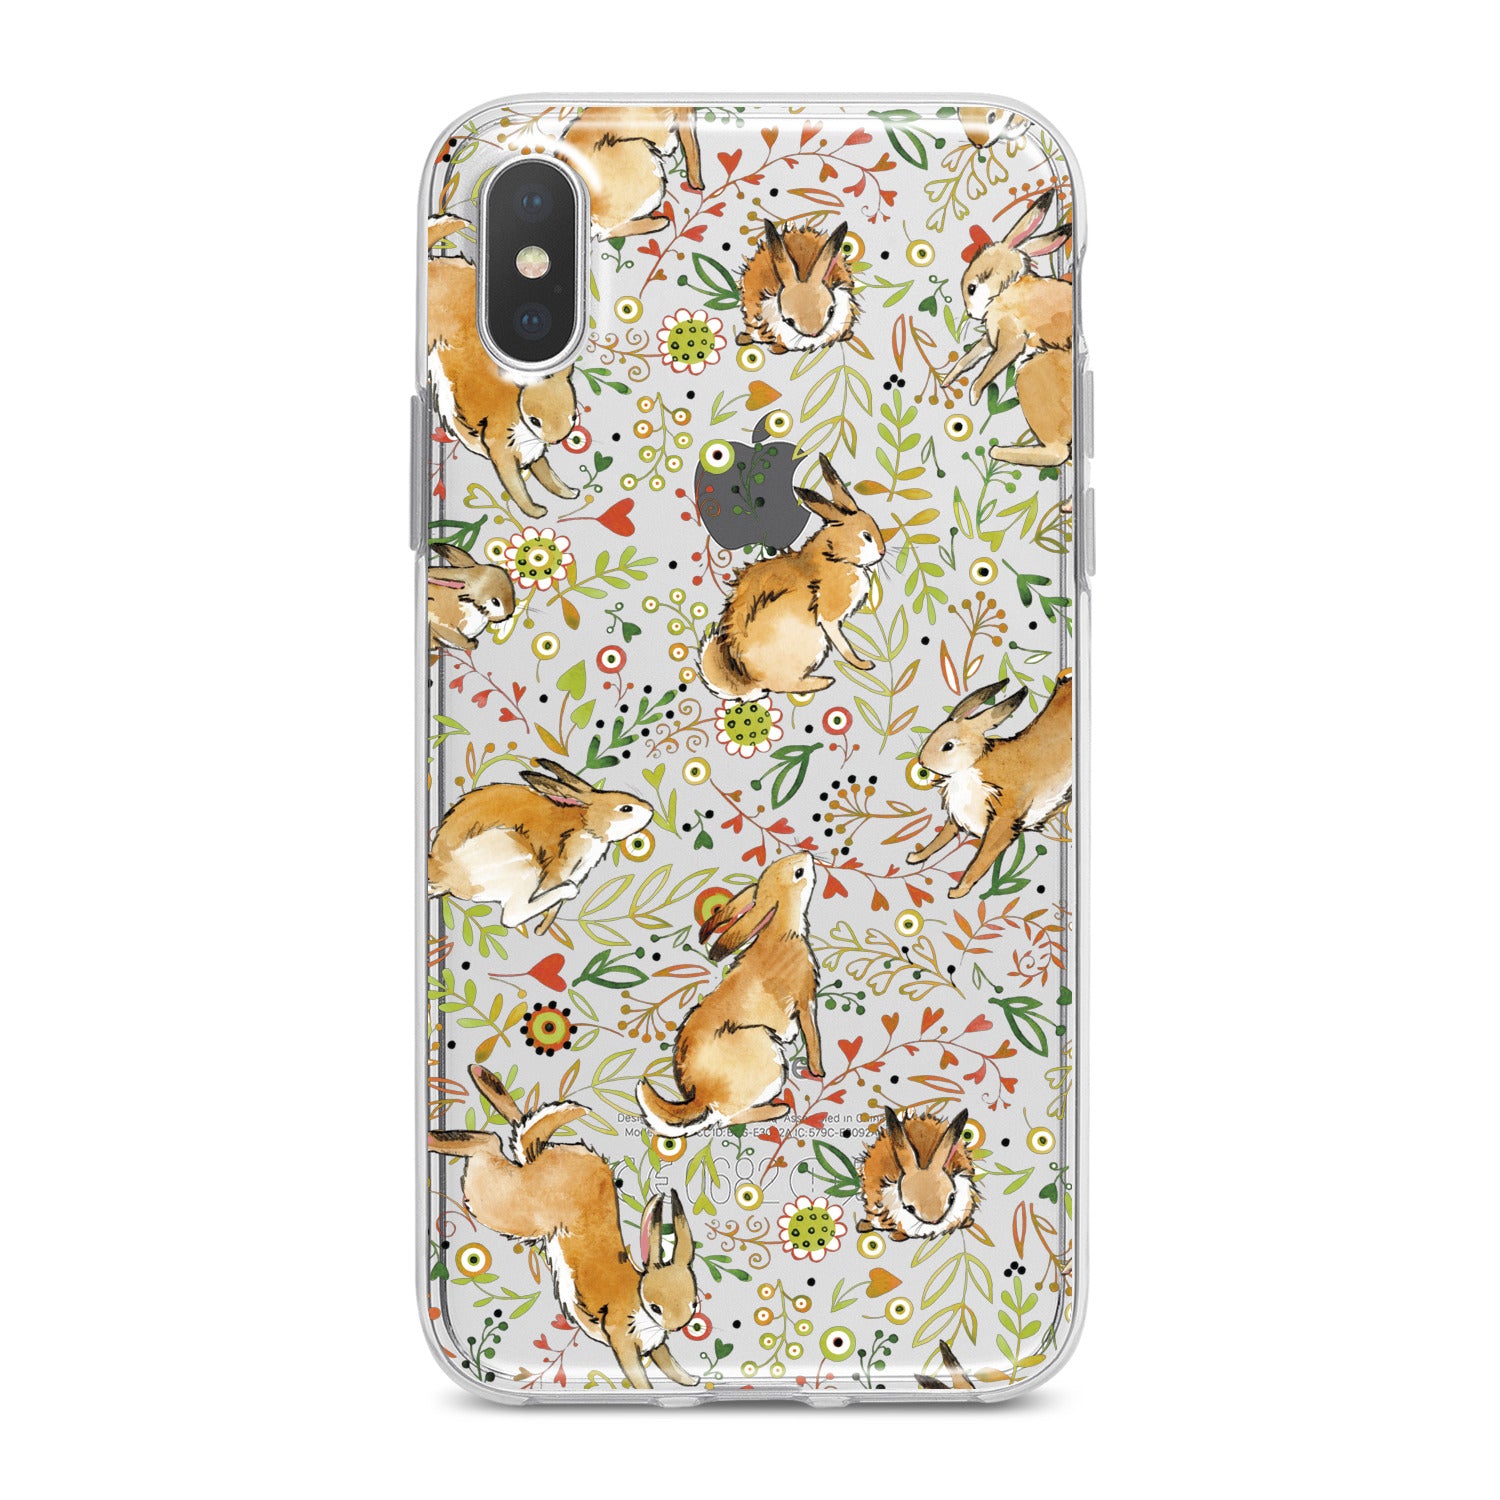 Lex Altern Floral Bunny Phone Case for your iPhone & Android phone.